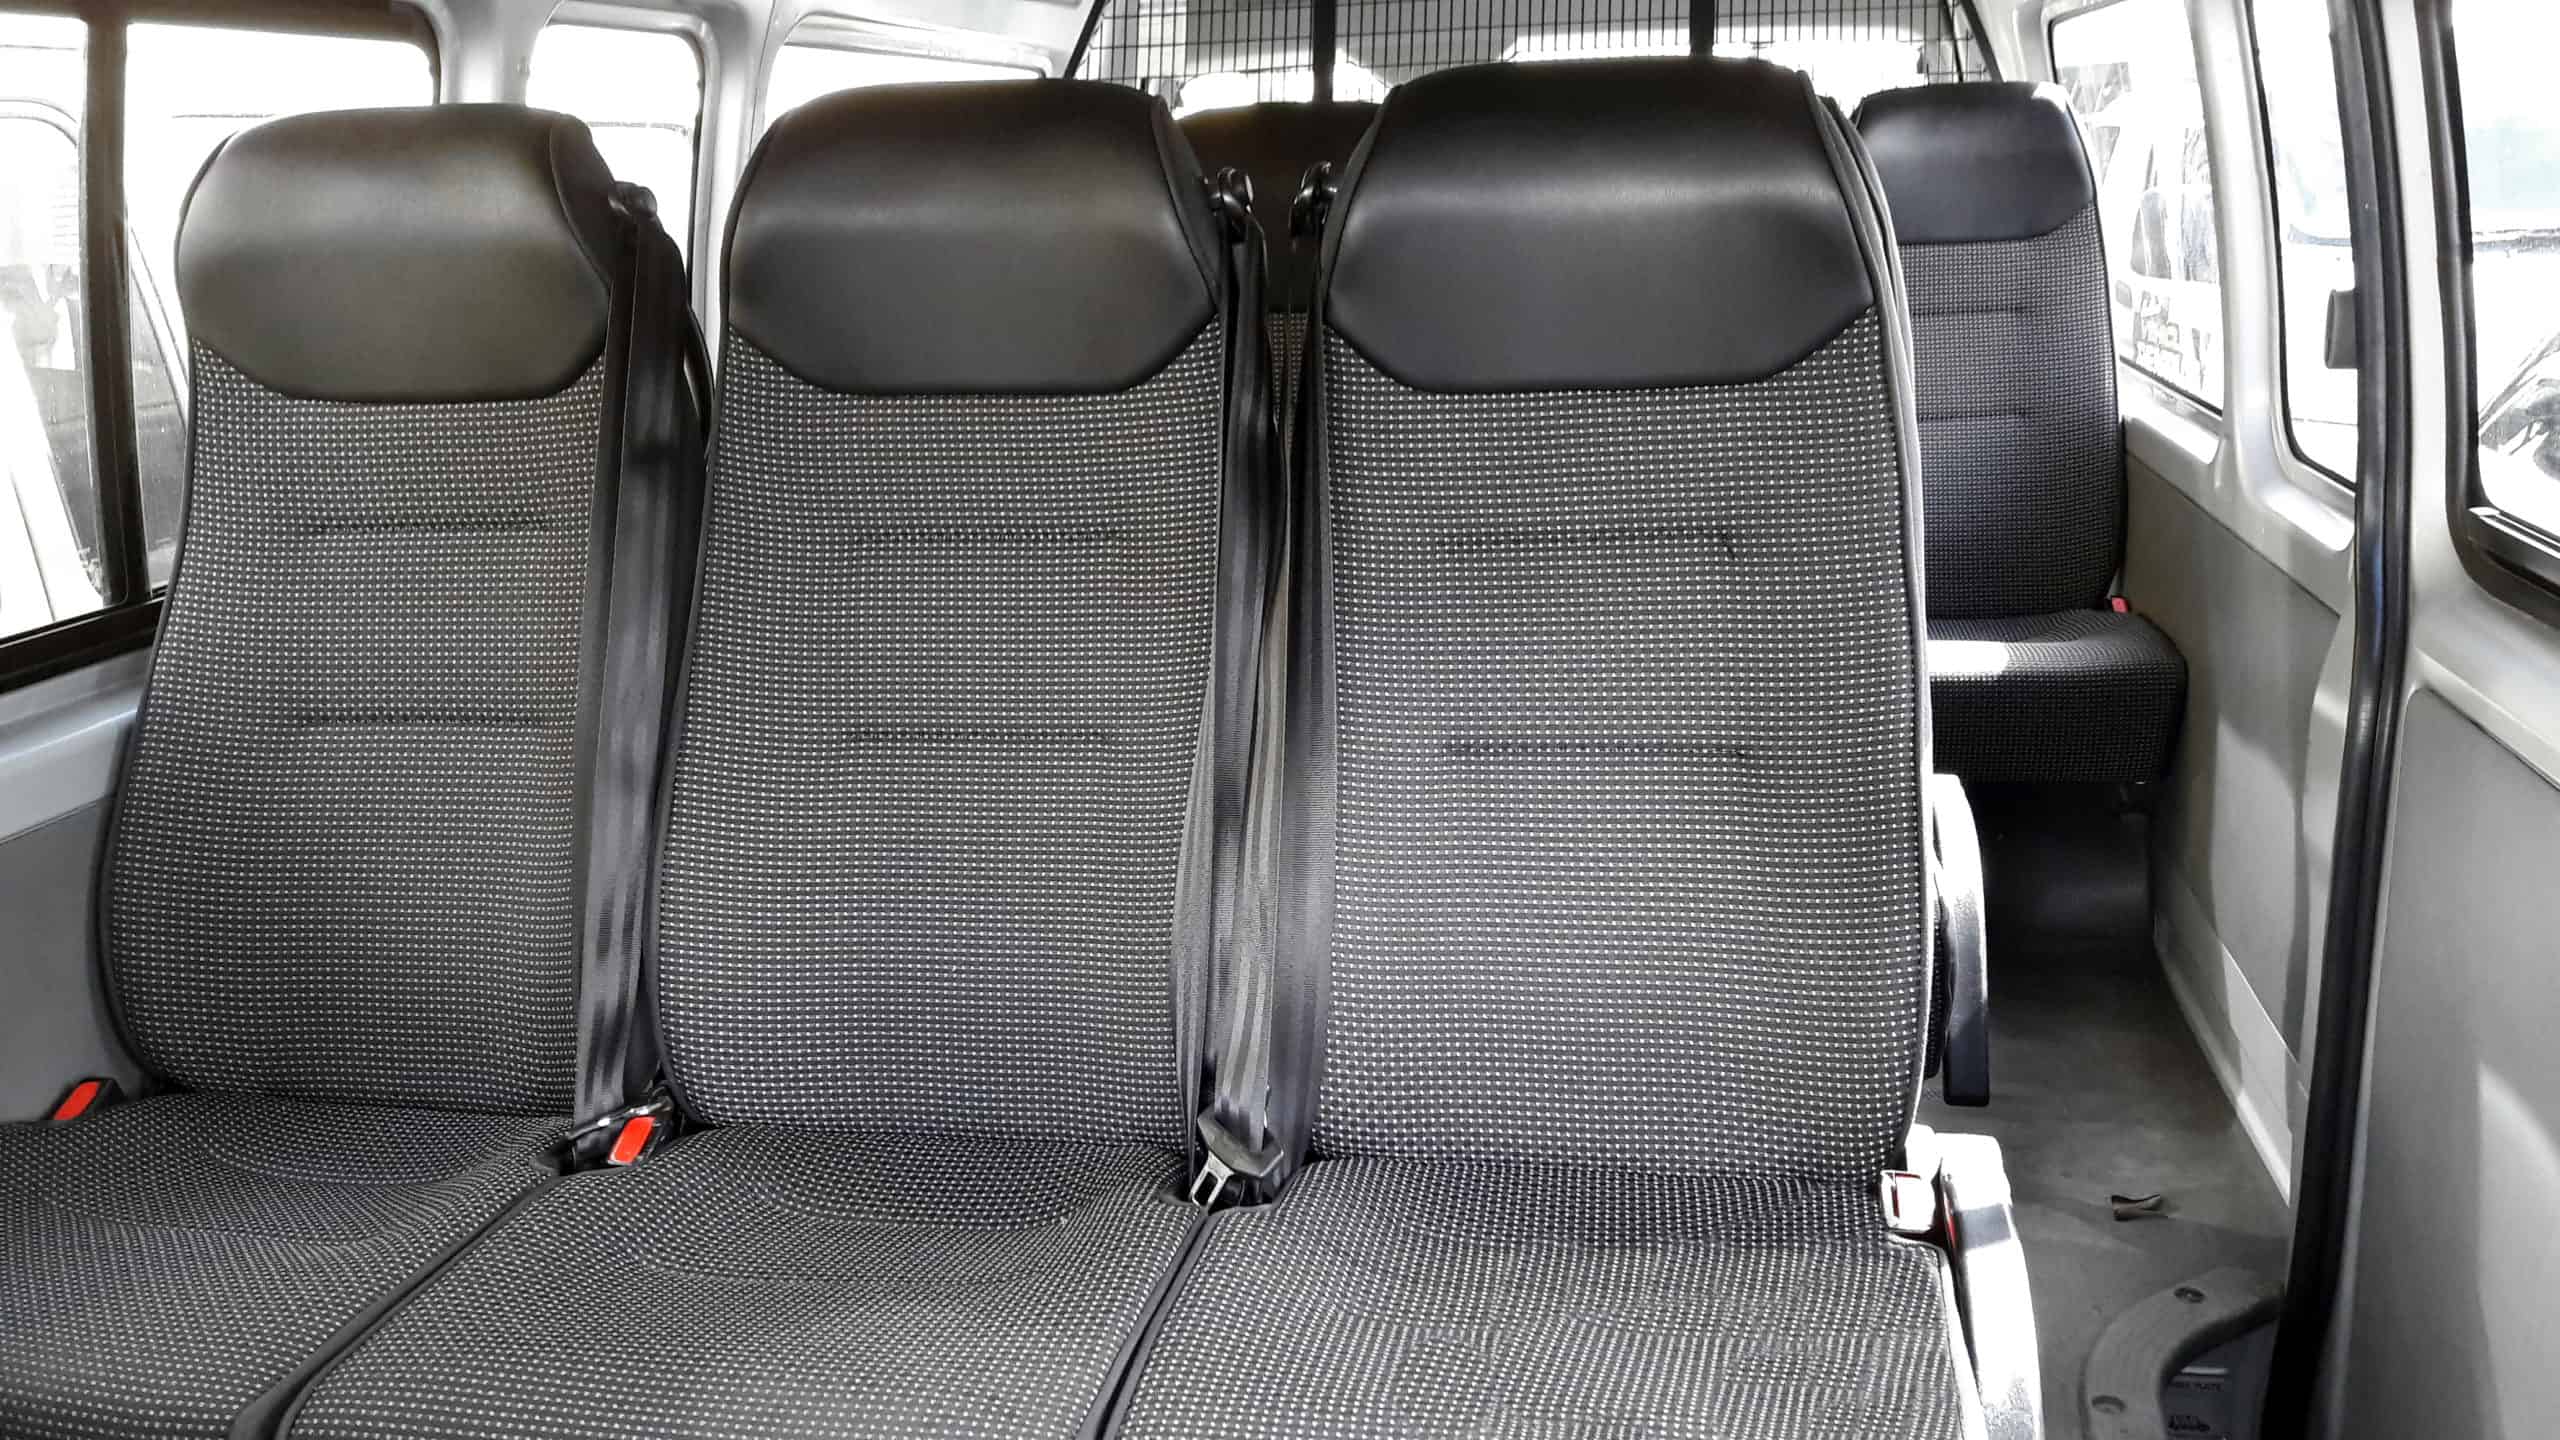 FIVE GROUPS THAT CAN BENEFIT FROM 12 SEATER VAN HIRE